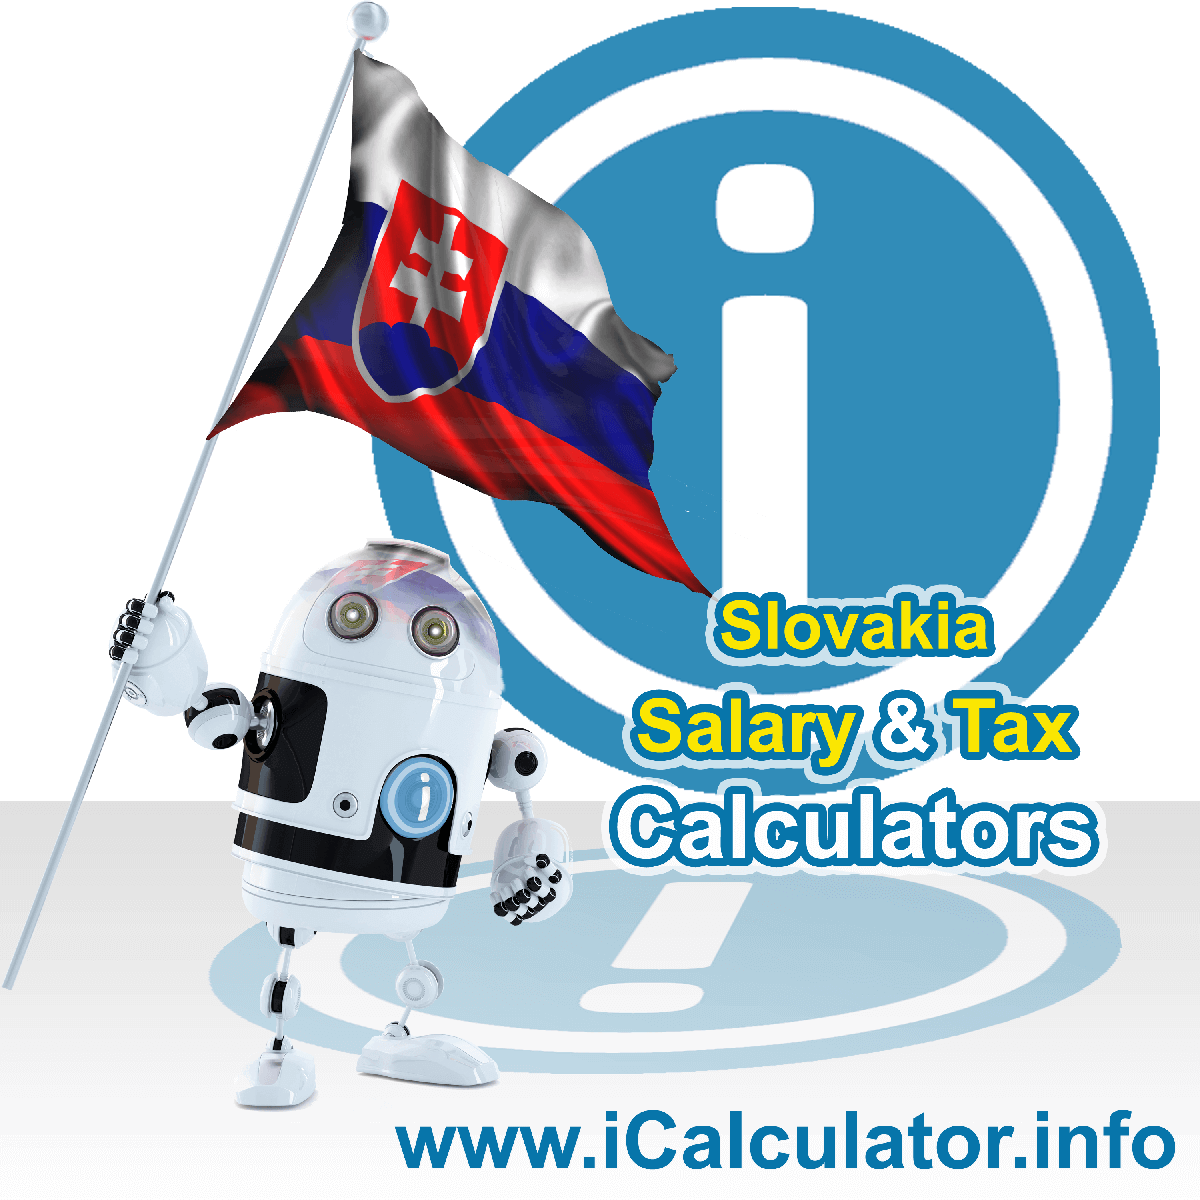 Slovakia Tax Calculator. This image shows the Slovakia flag and information relating to the tax formula for the Slovakia Salary Calculator